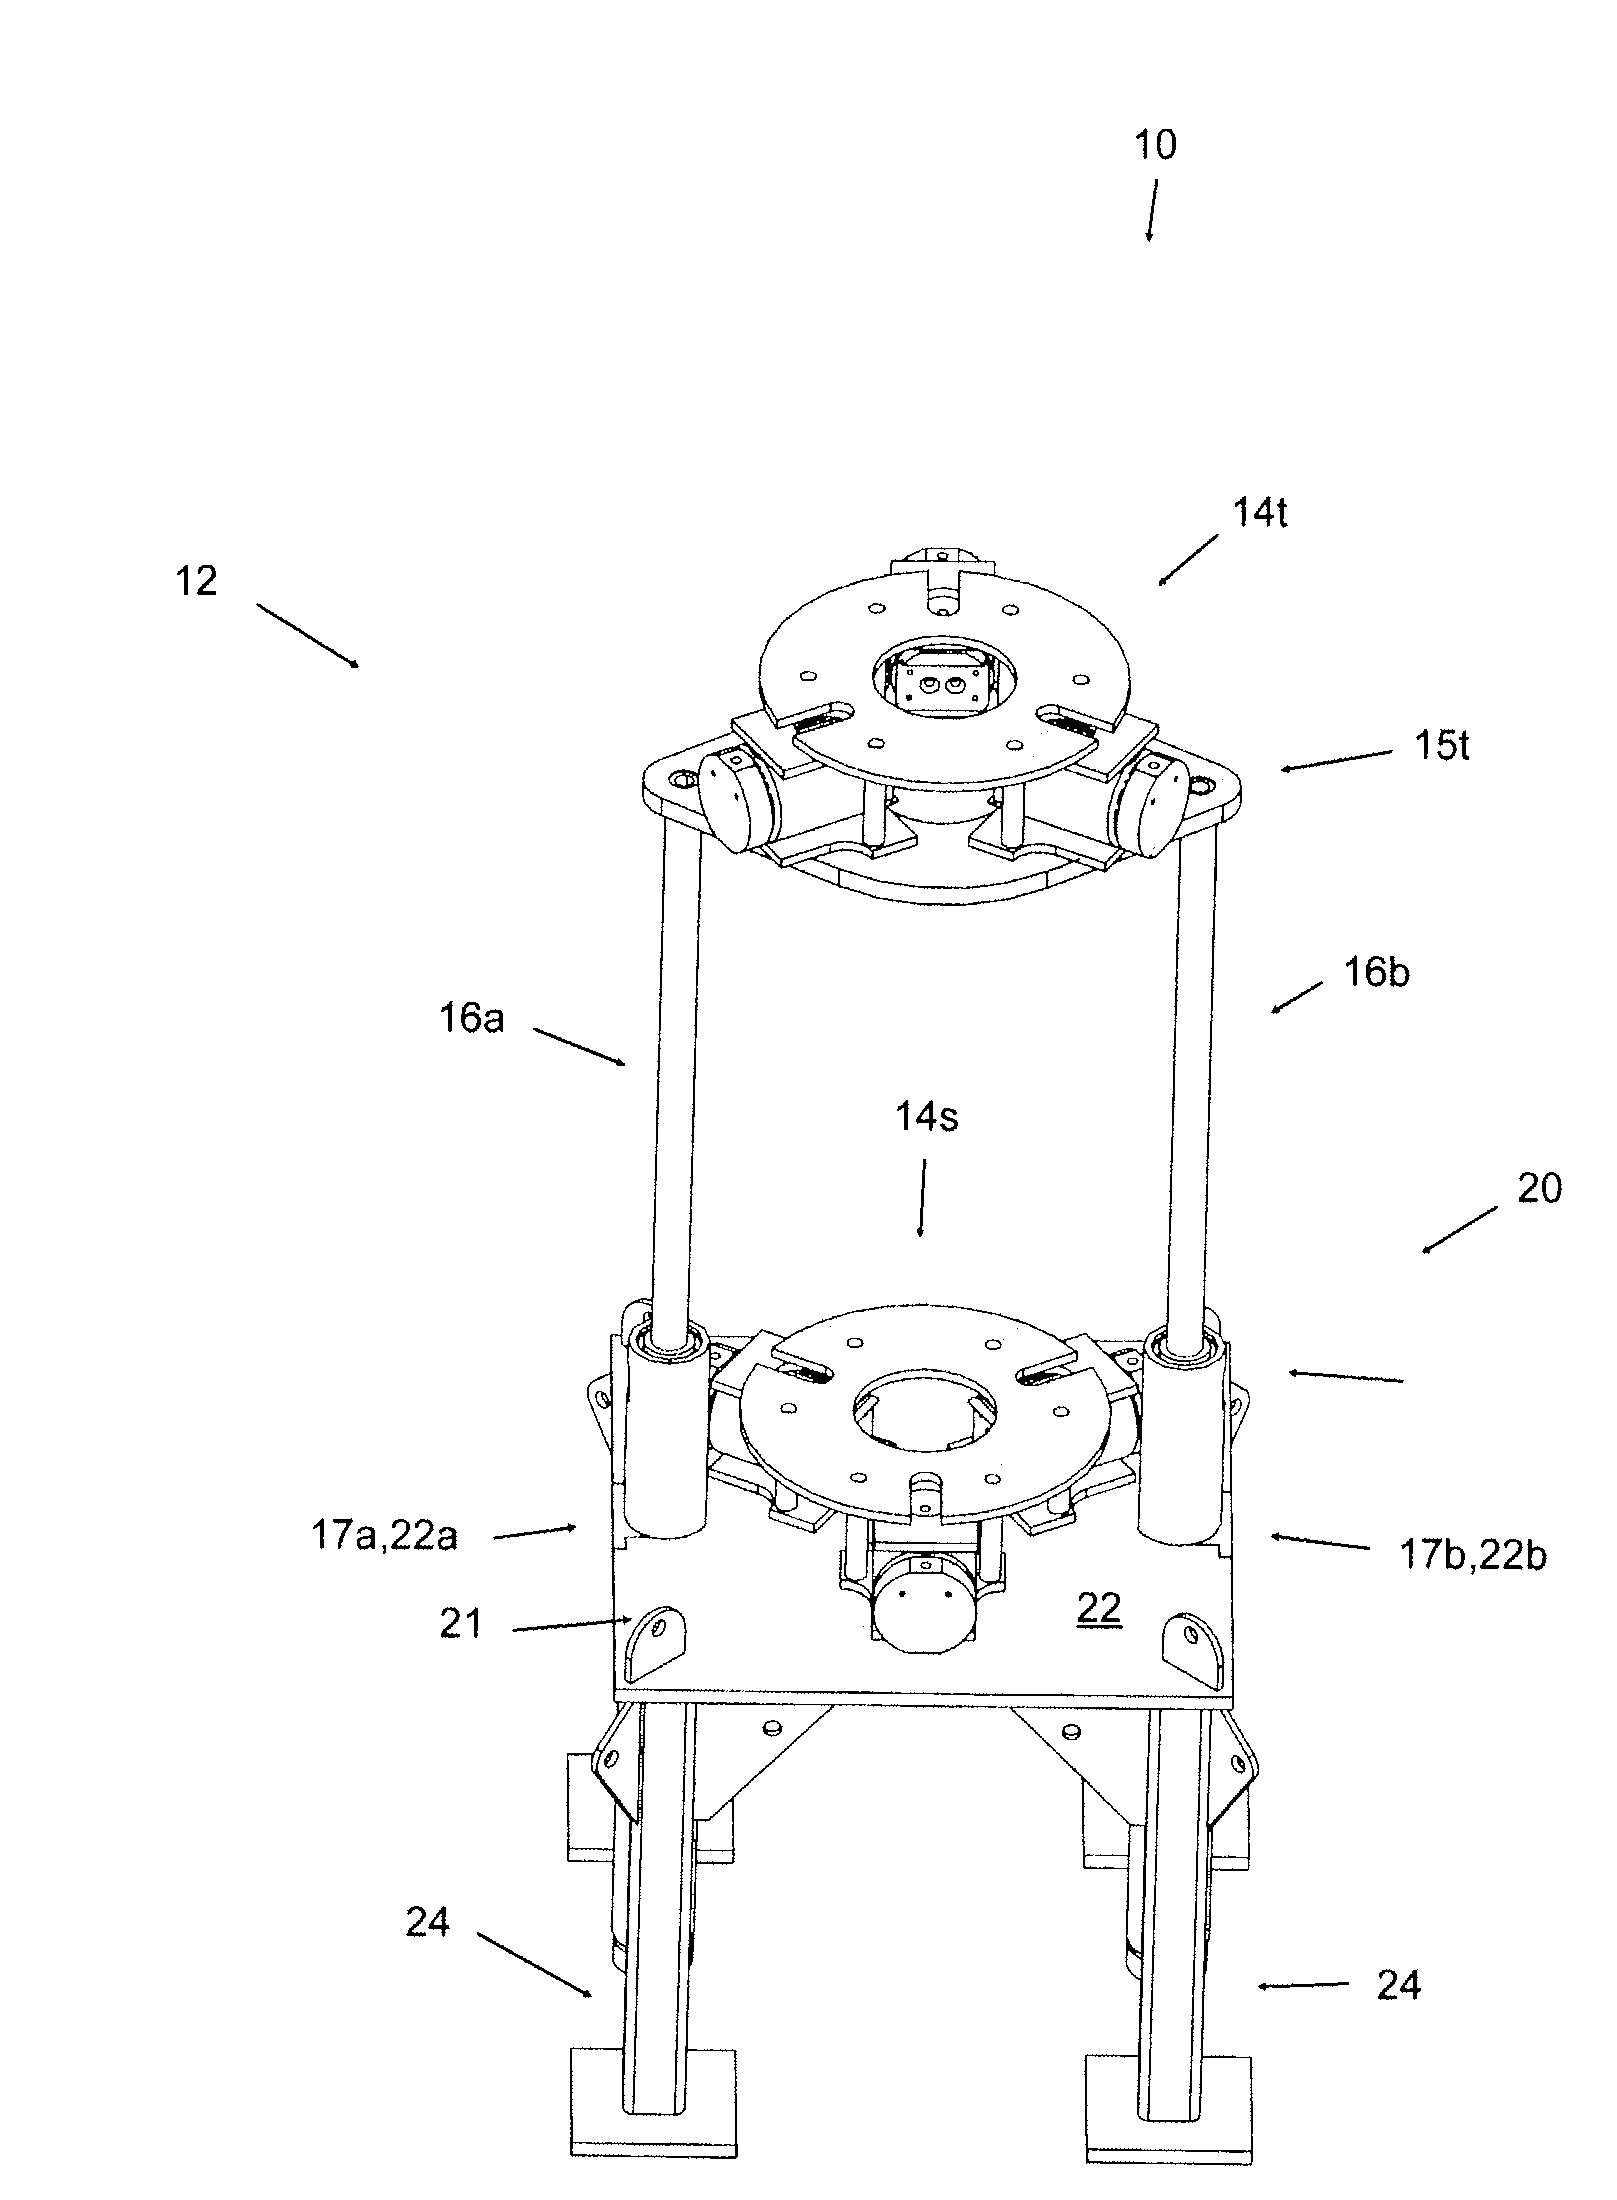 Push / pull system and support structure for snubbing unit or the like on a rig floor